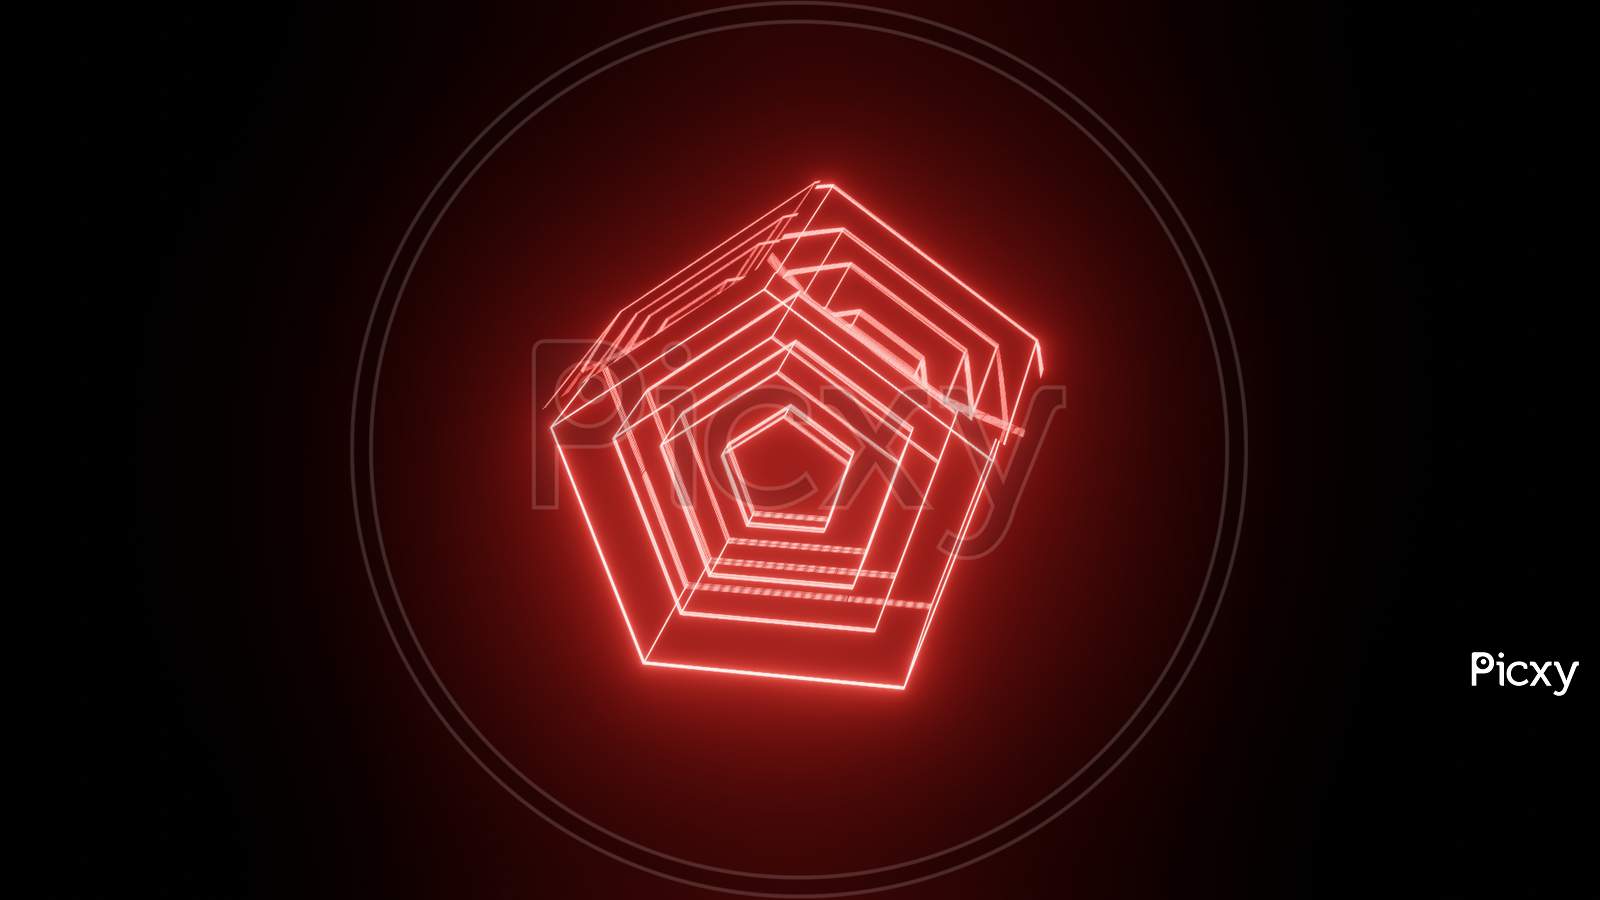 Illustration Graphic Of 3D Rendering Beautiful Red Neon Lighting Wire Frame Object, Isolated On The Black Background.